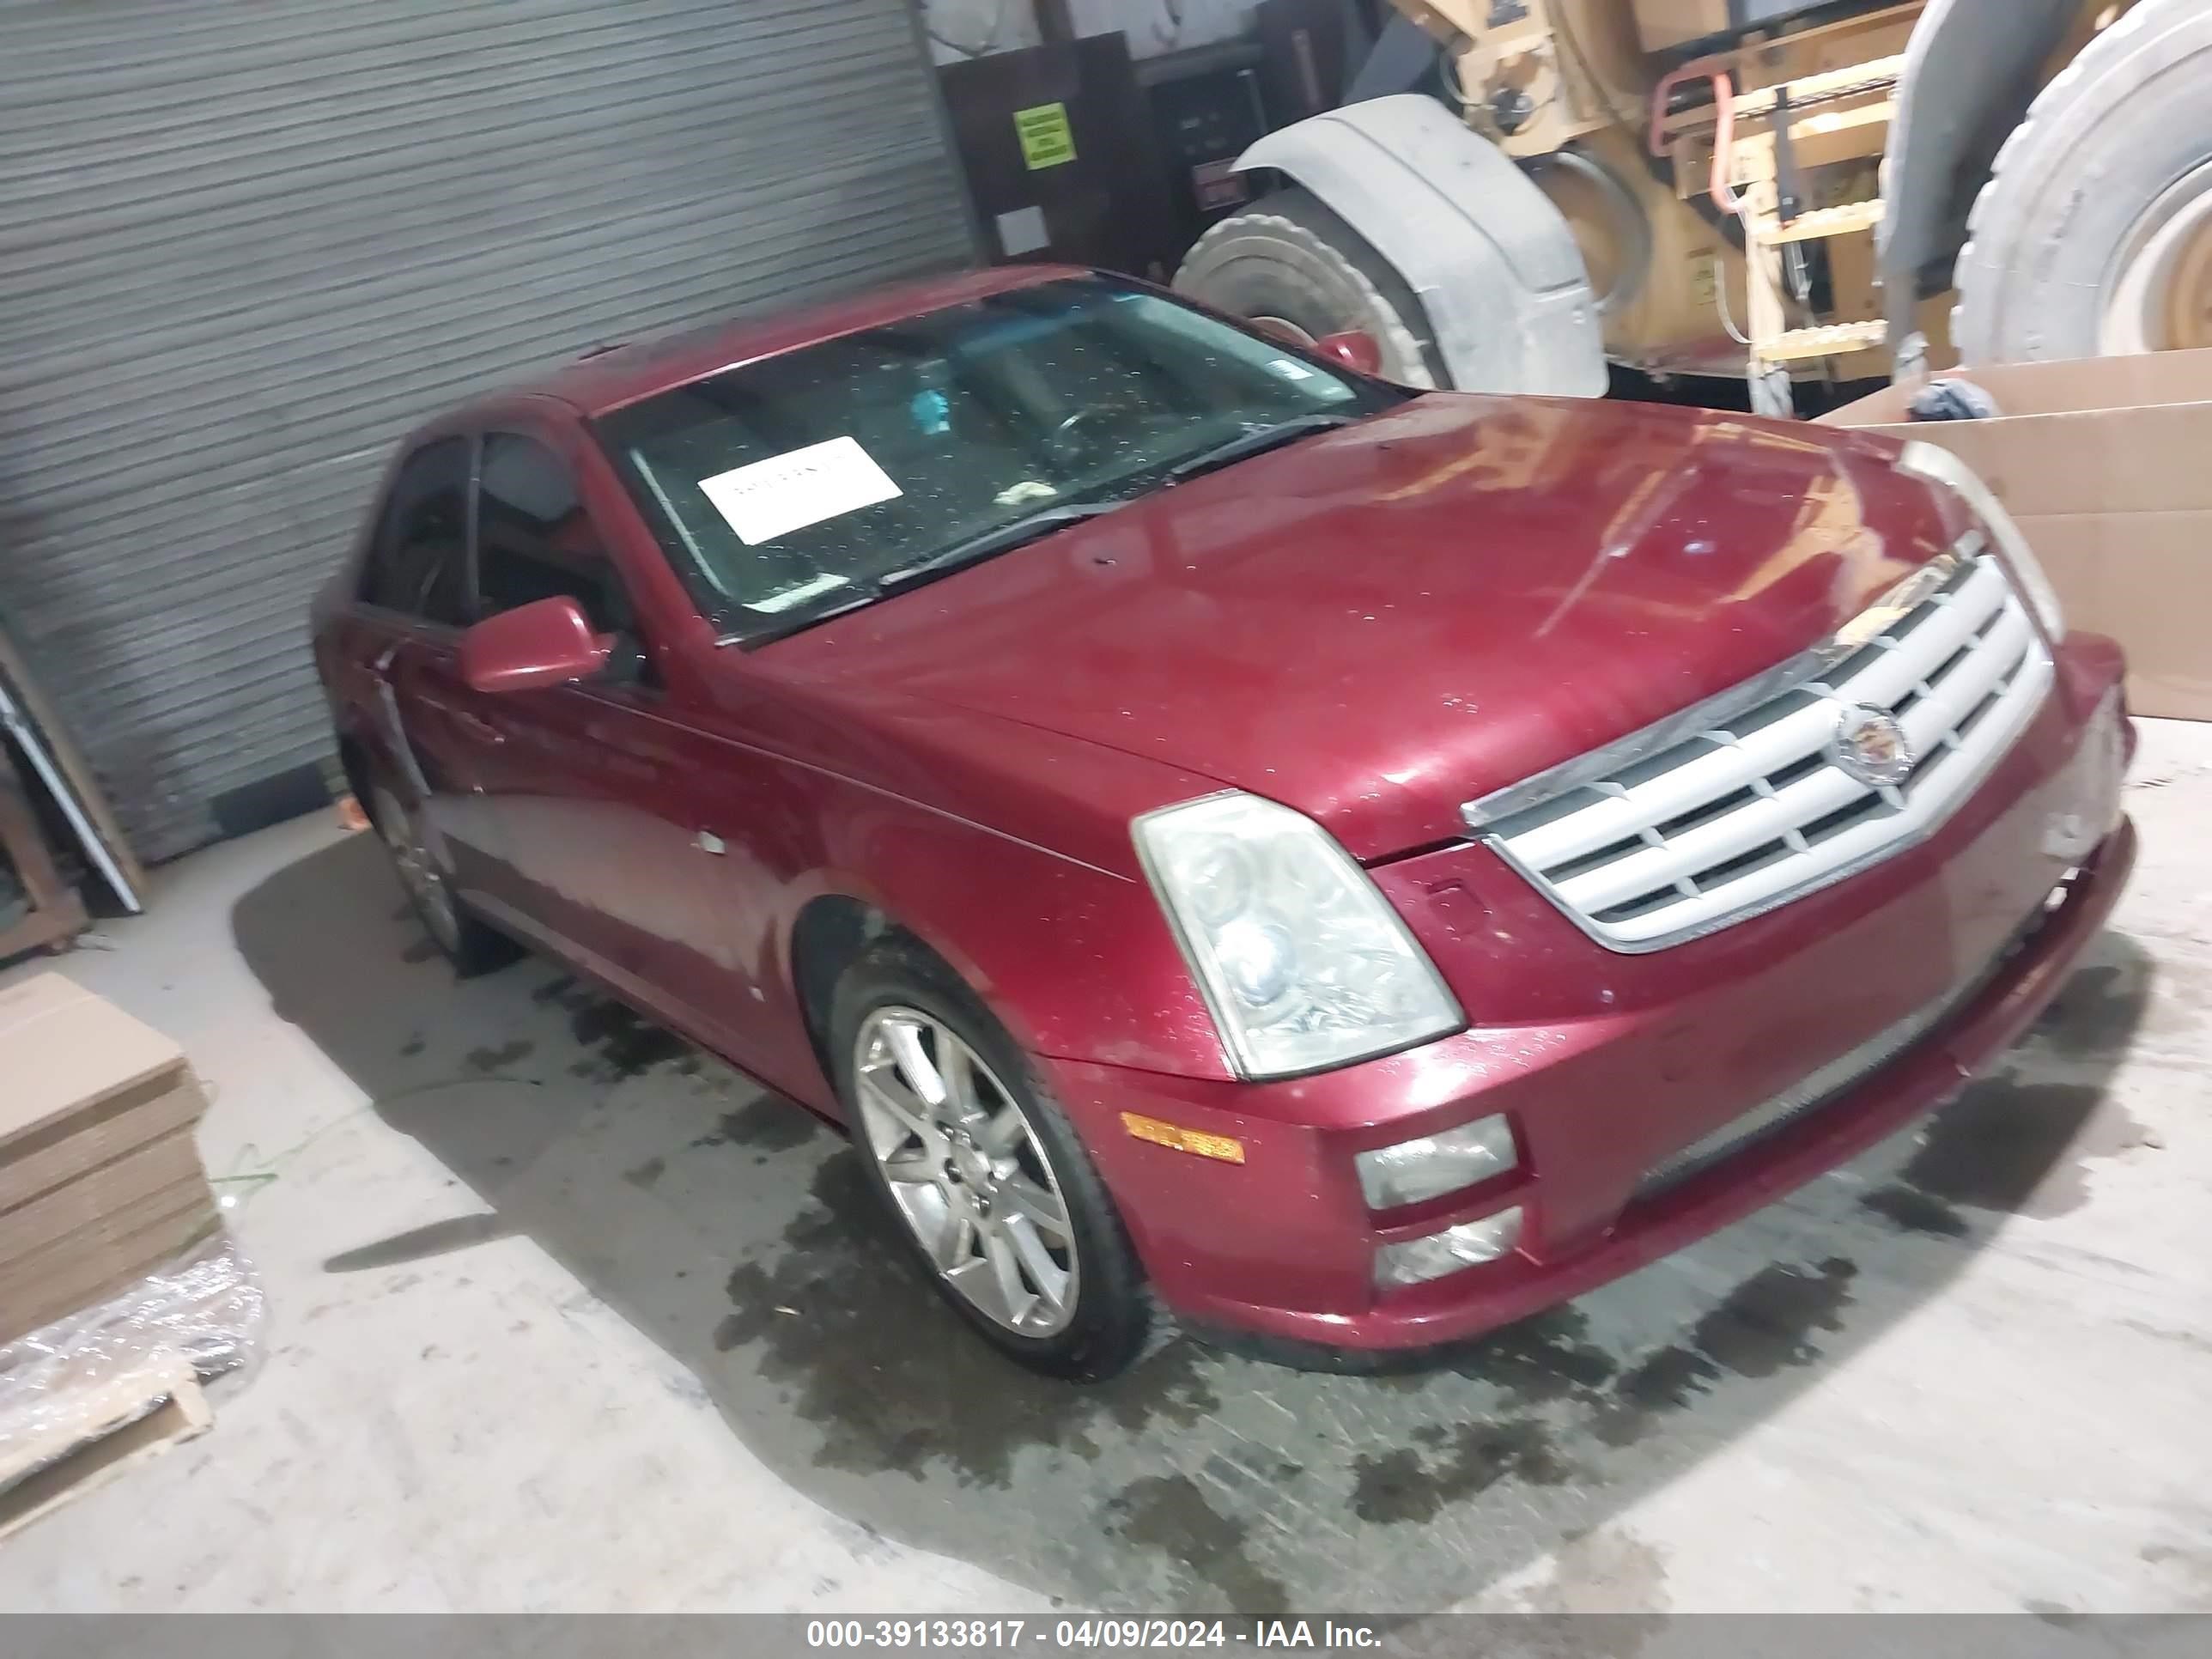 VIN: 1G6DC67A360218469 - cadillac sts